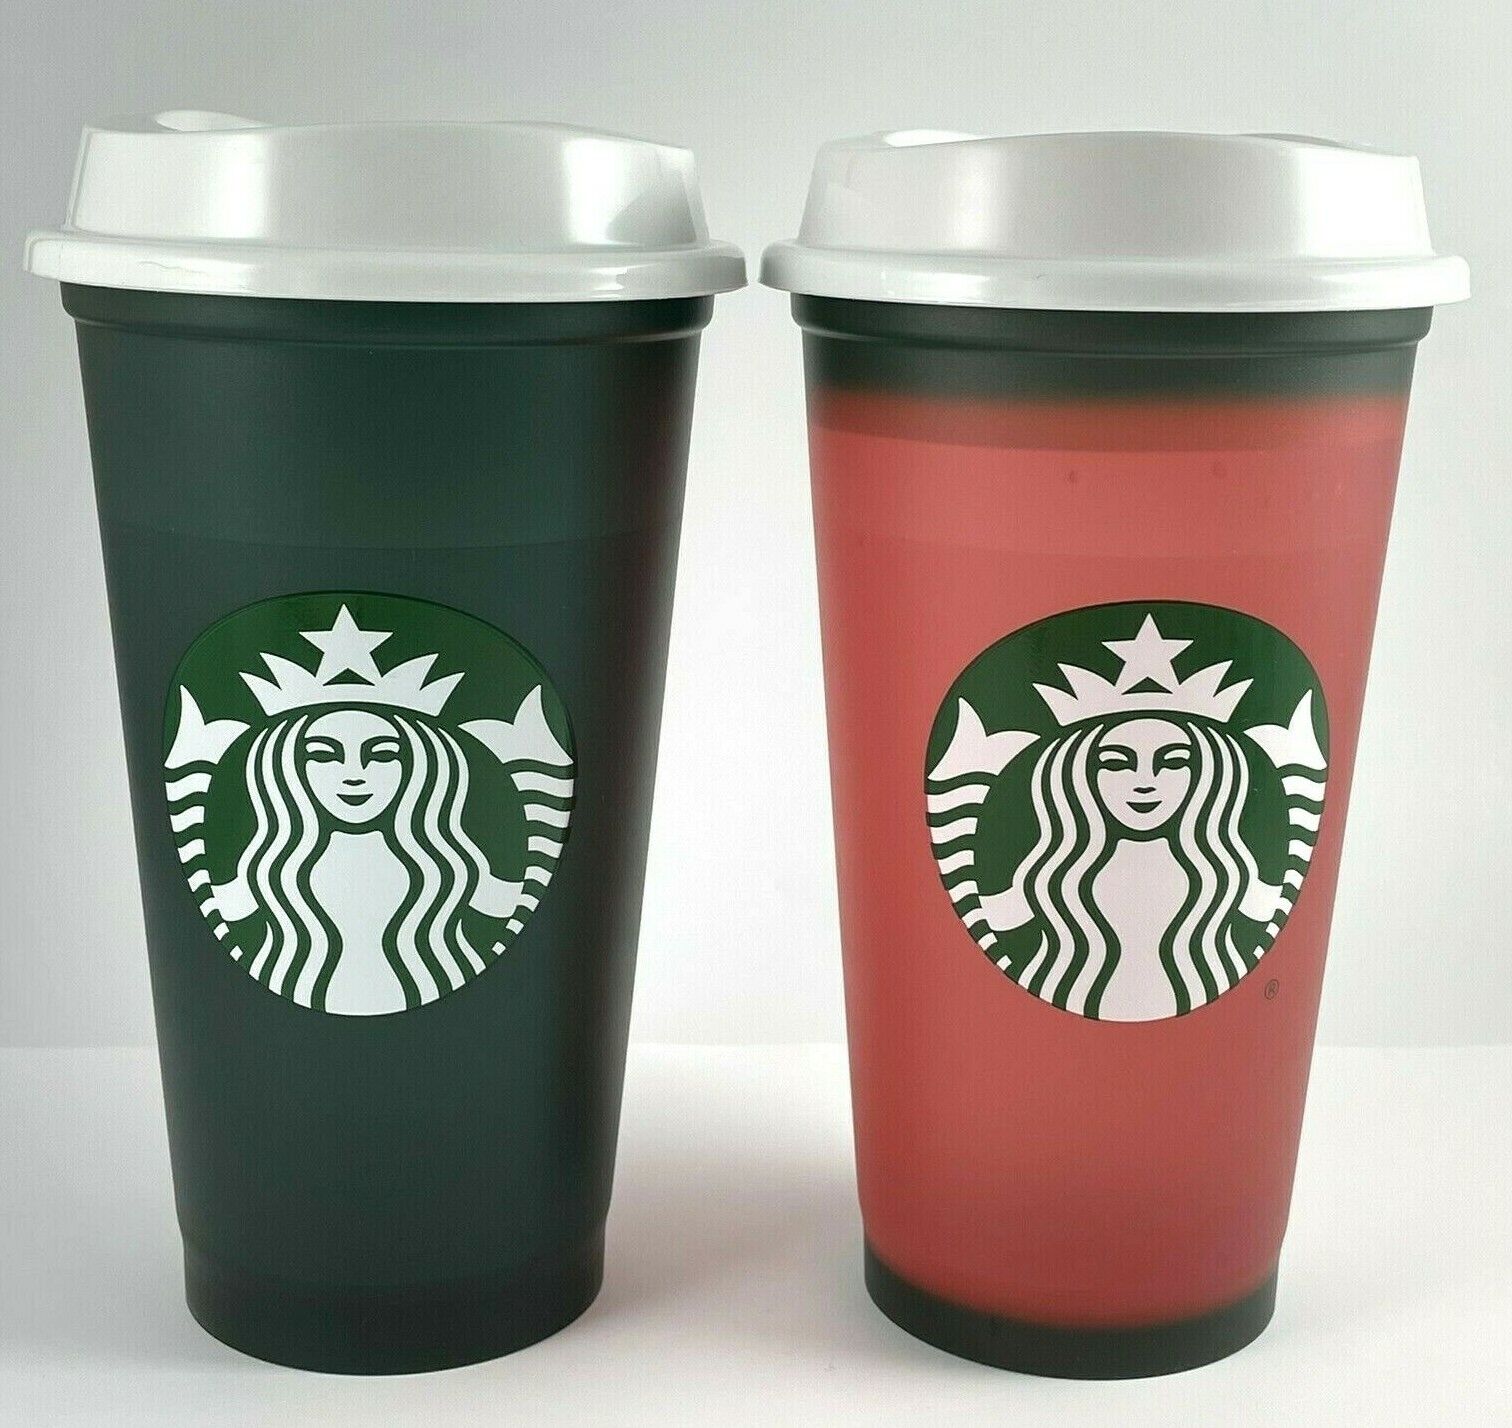 2 Starbucks 2020 Color Changing Reusable Cups Green To Red Holiday Xmas Hot  Starbucks